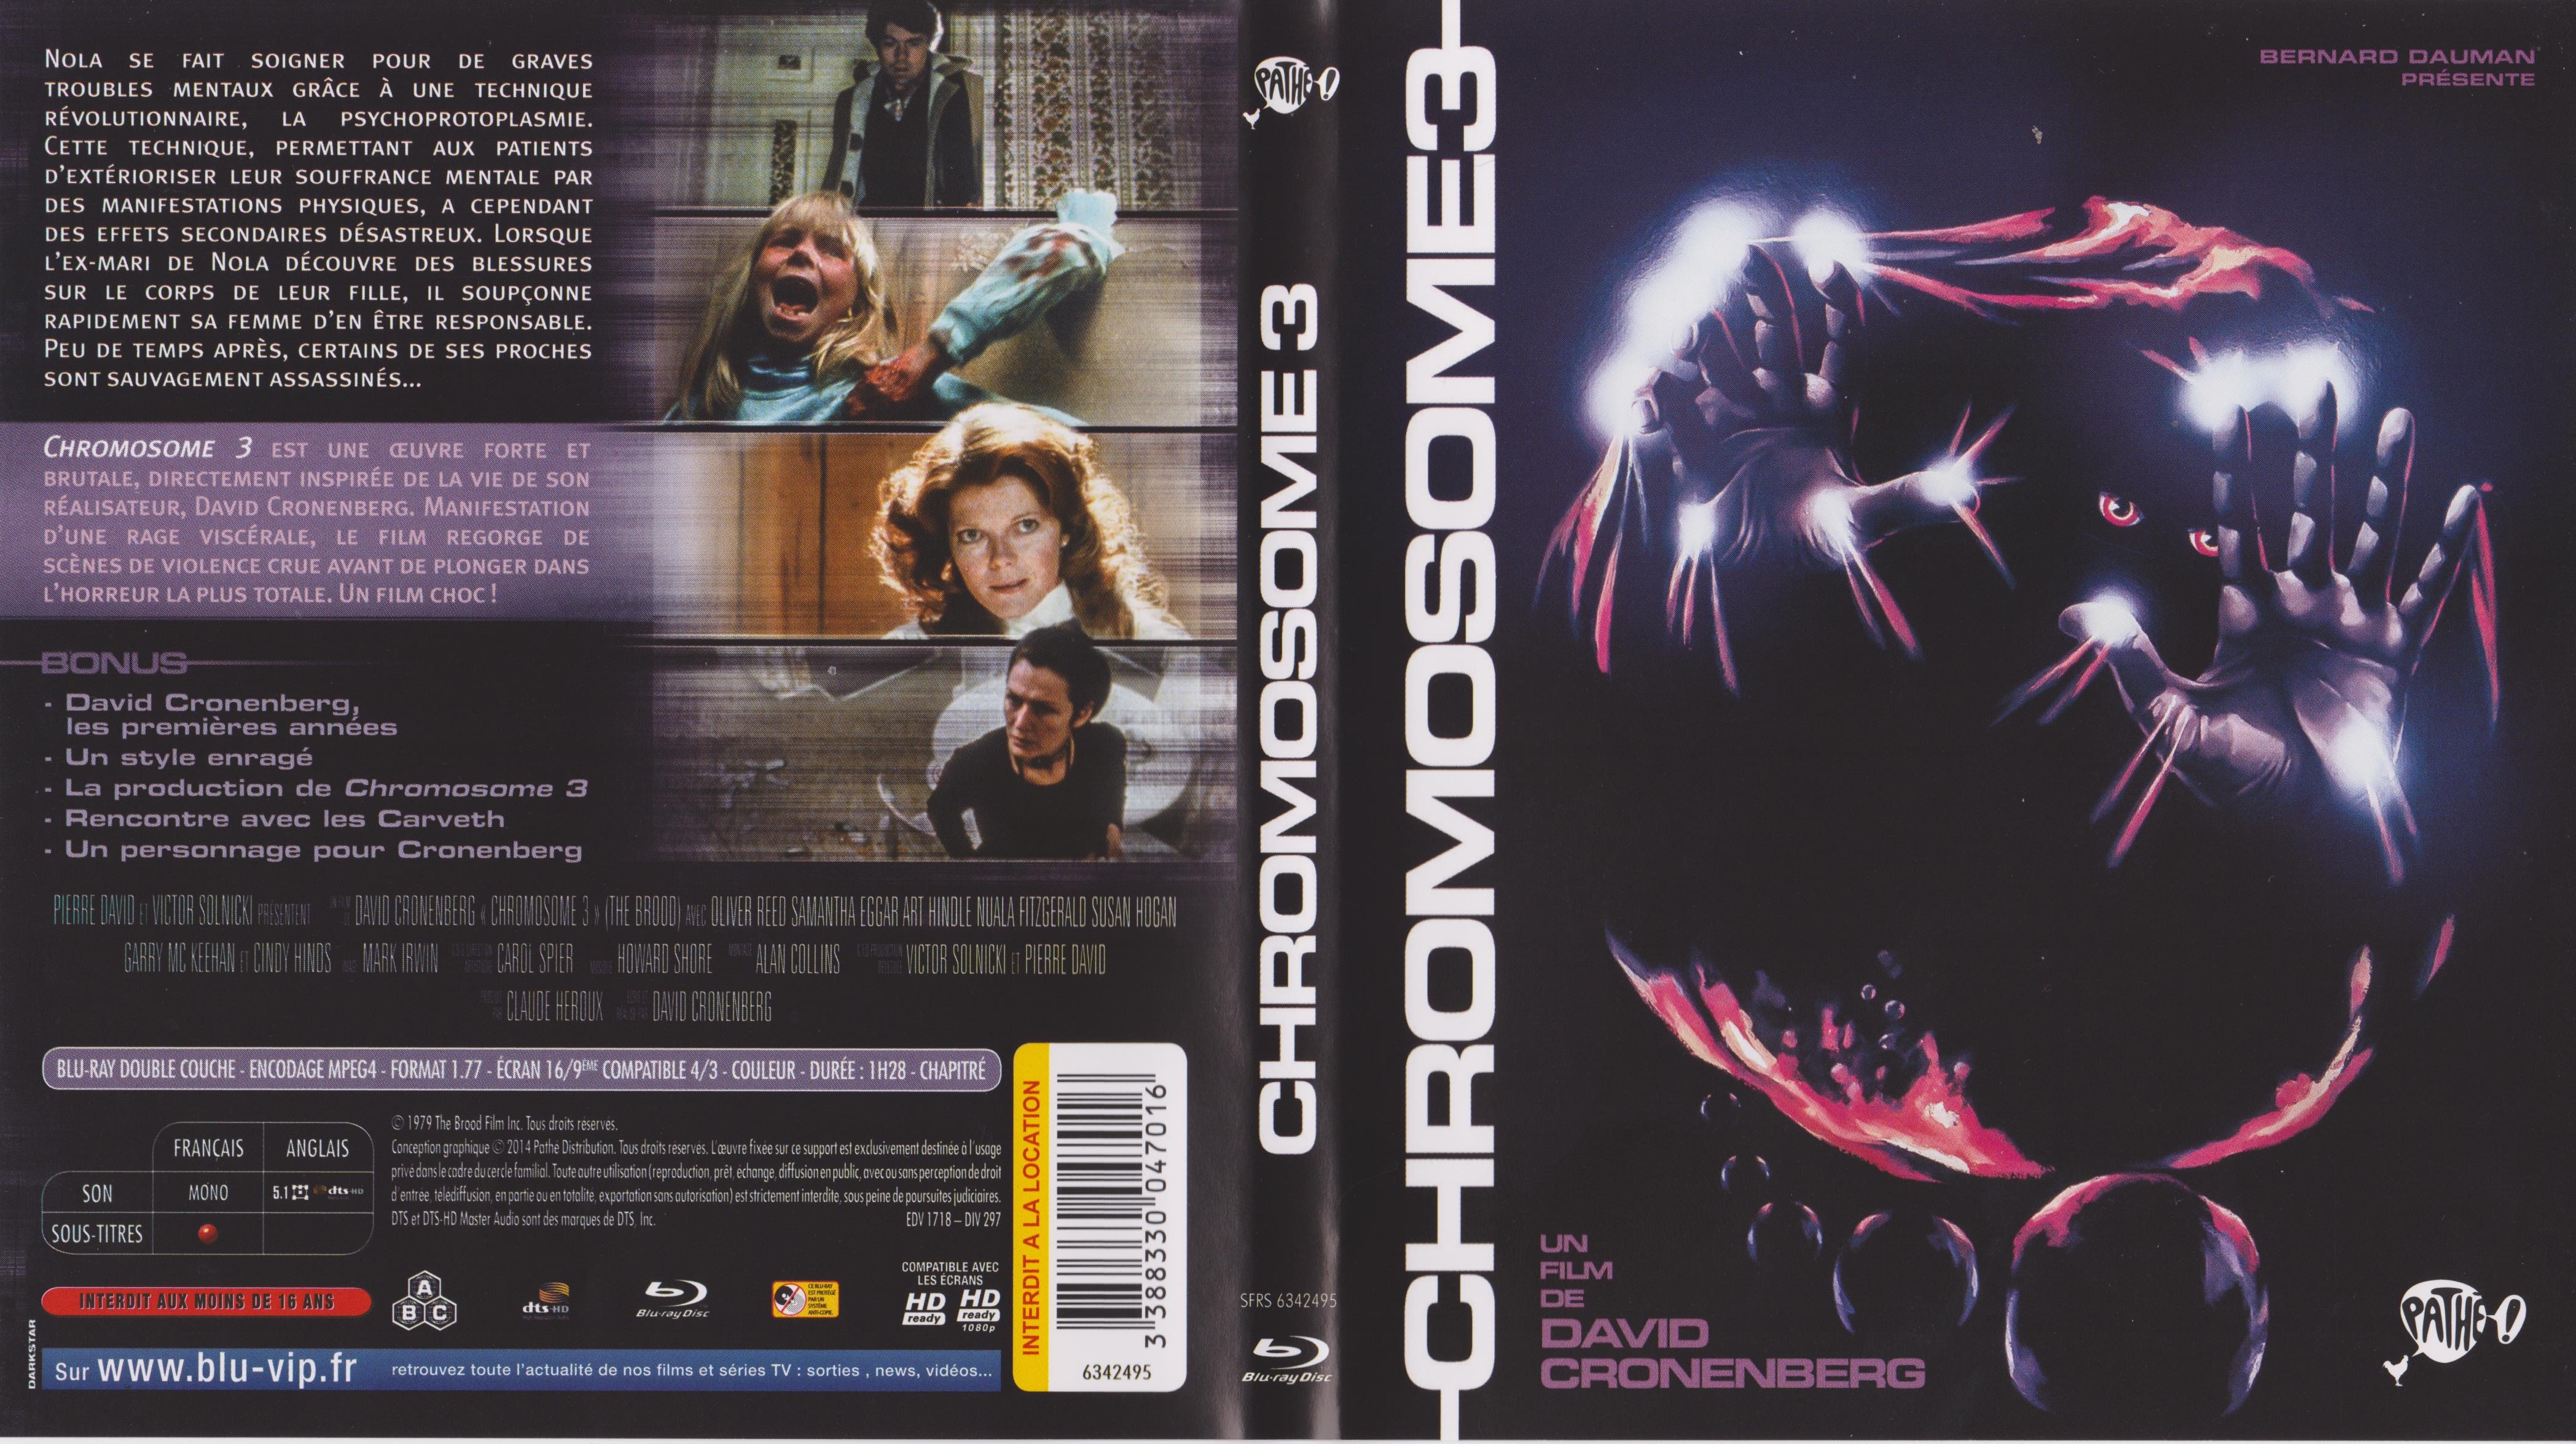 Jaquette DVD Chromosome 3 (BLU-RAY)